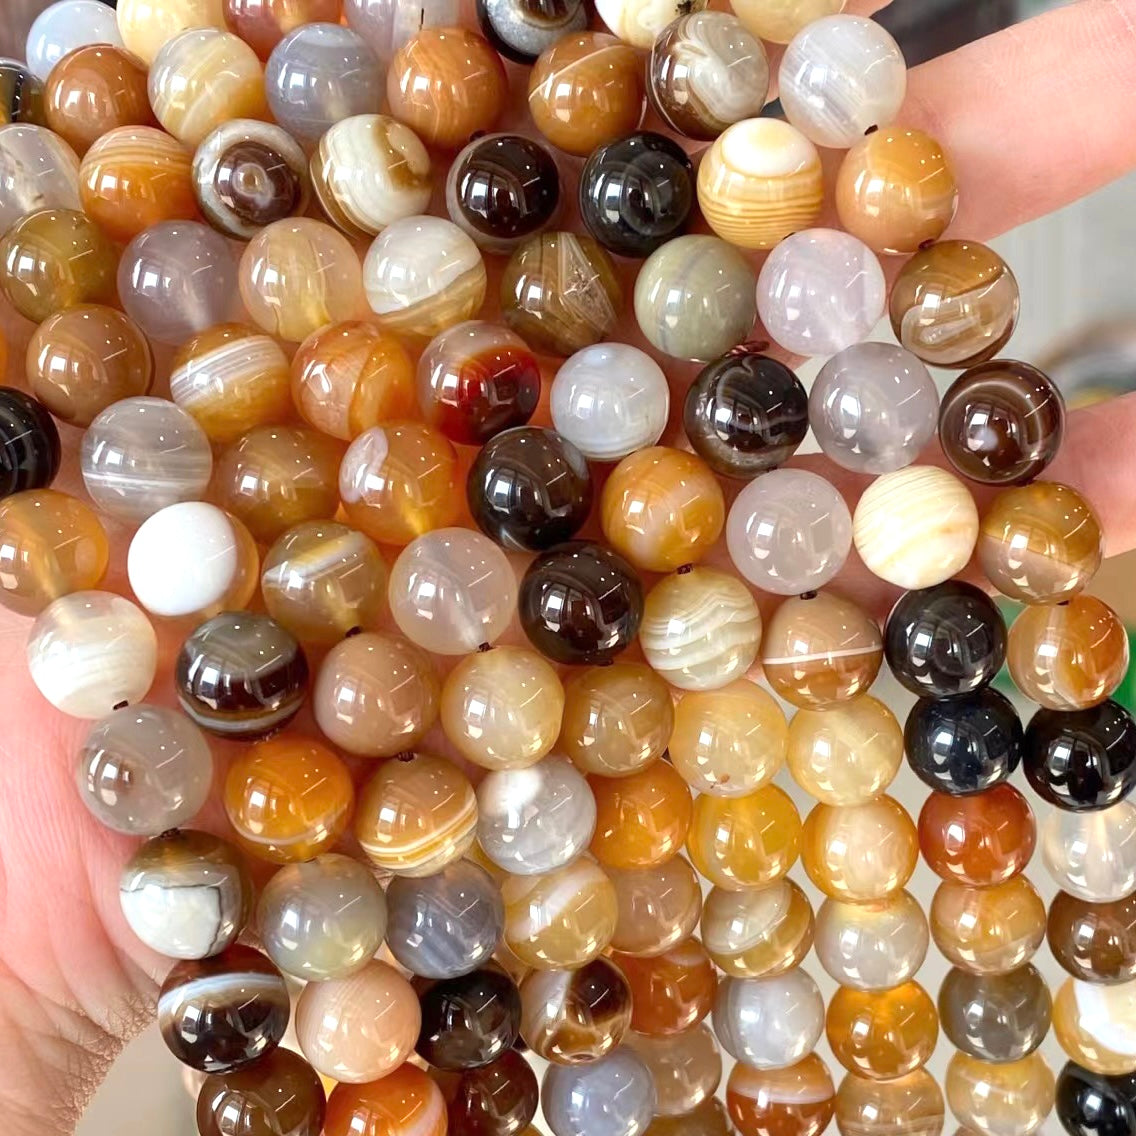 2 Strands/lot 10mm Yellow Botswana Agate Stone Round Beads Stone Beads New Beads Arrivals Other Stone Beads Round Agate Beads Charms Beads Beyond